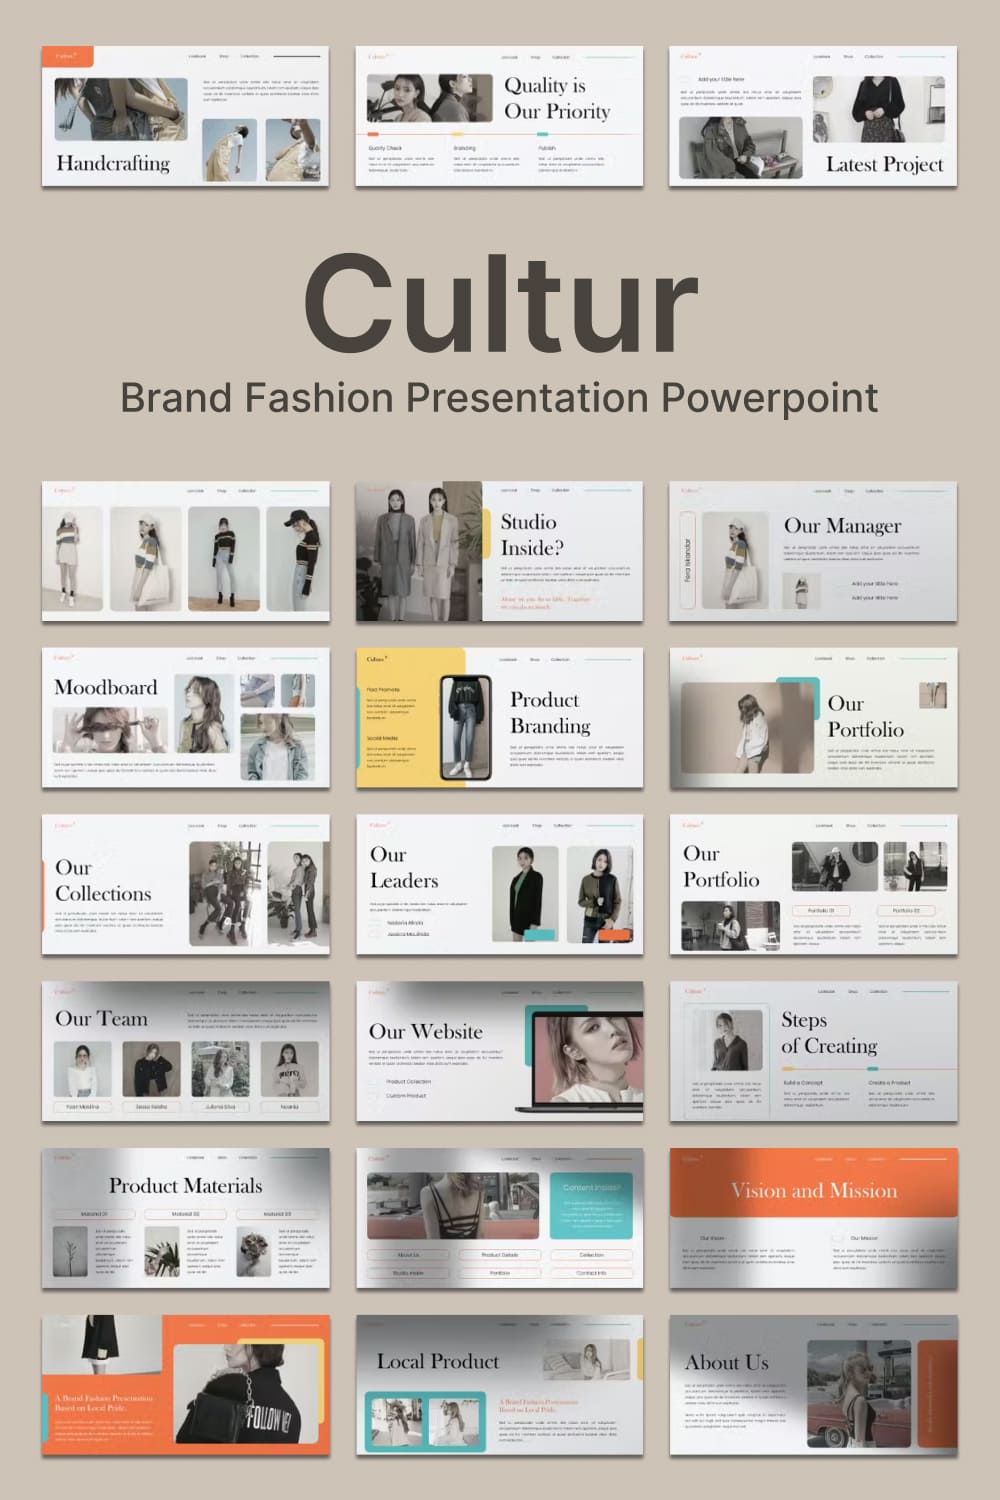 Culture brand fashion presentation powerpoint - pinterest image preview.